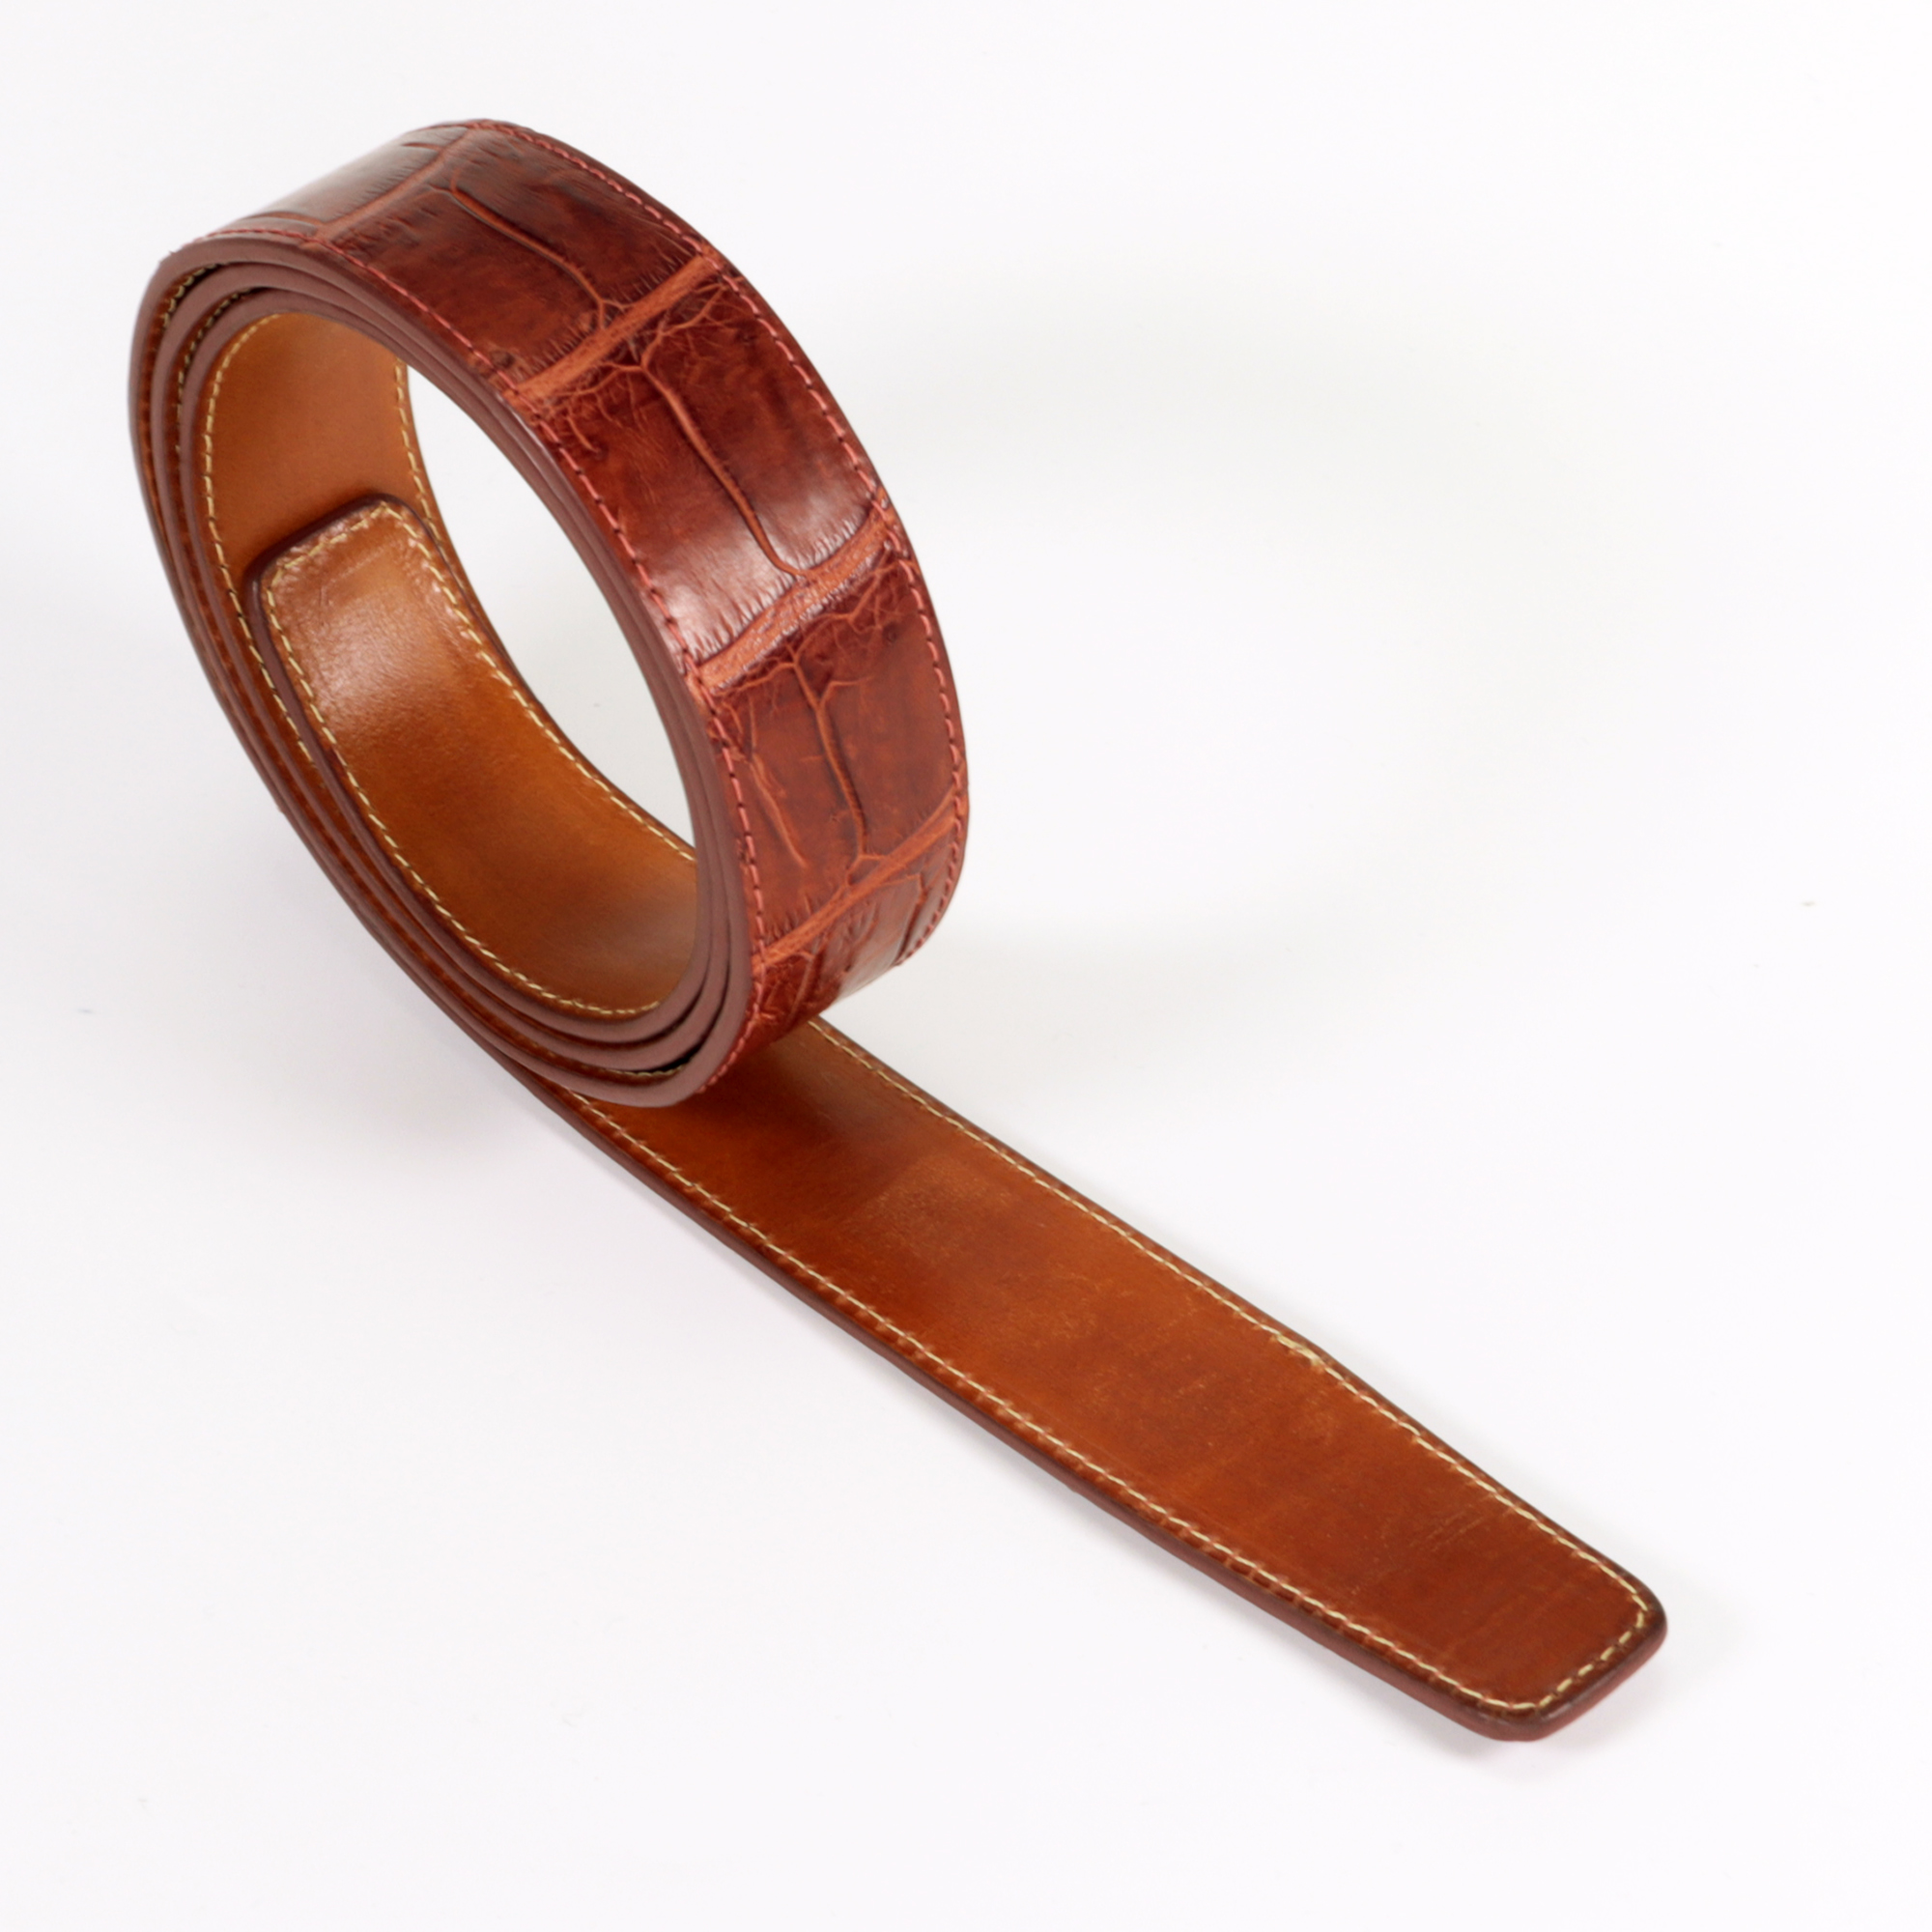 Men's Genuine Crocodile Leather Belt - Perfect for Formal and Casual Wear- Without Buckle